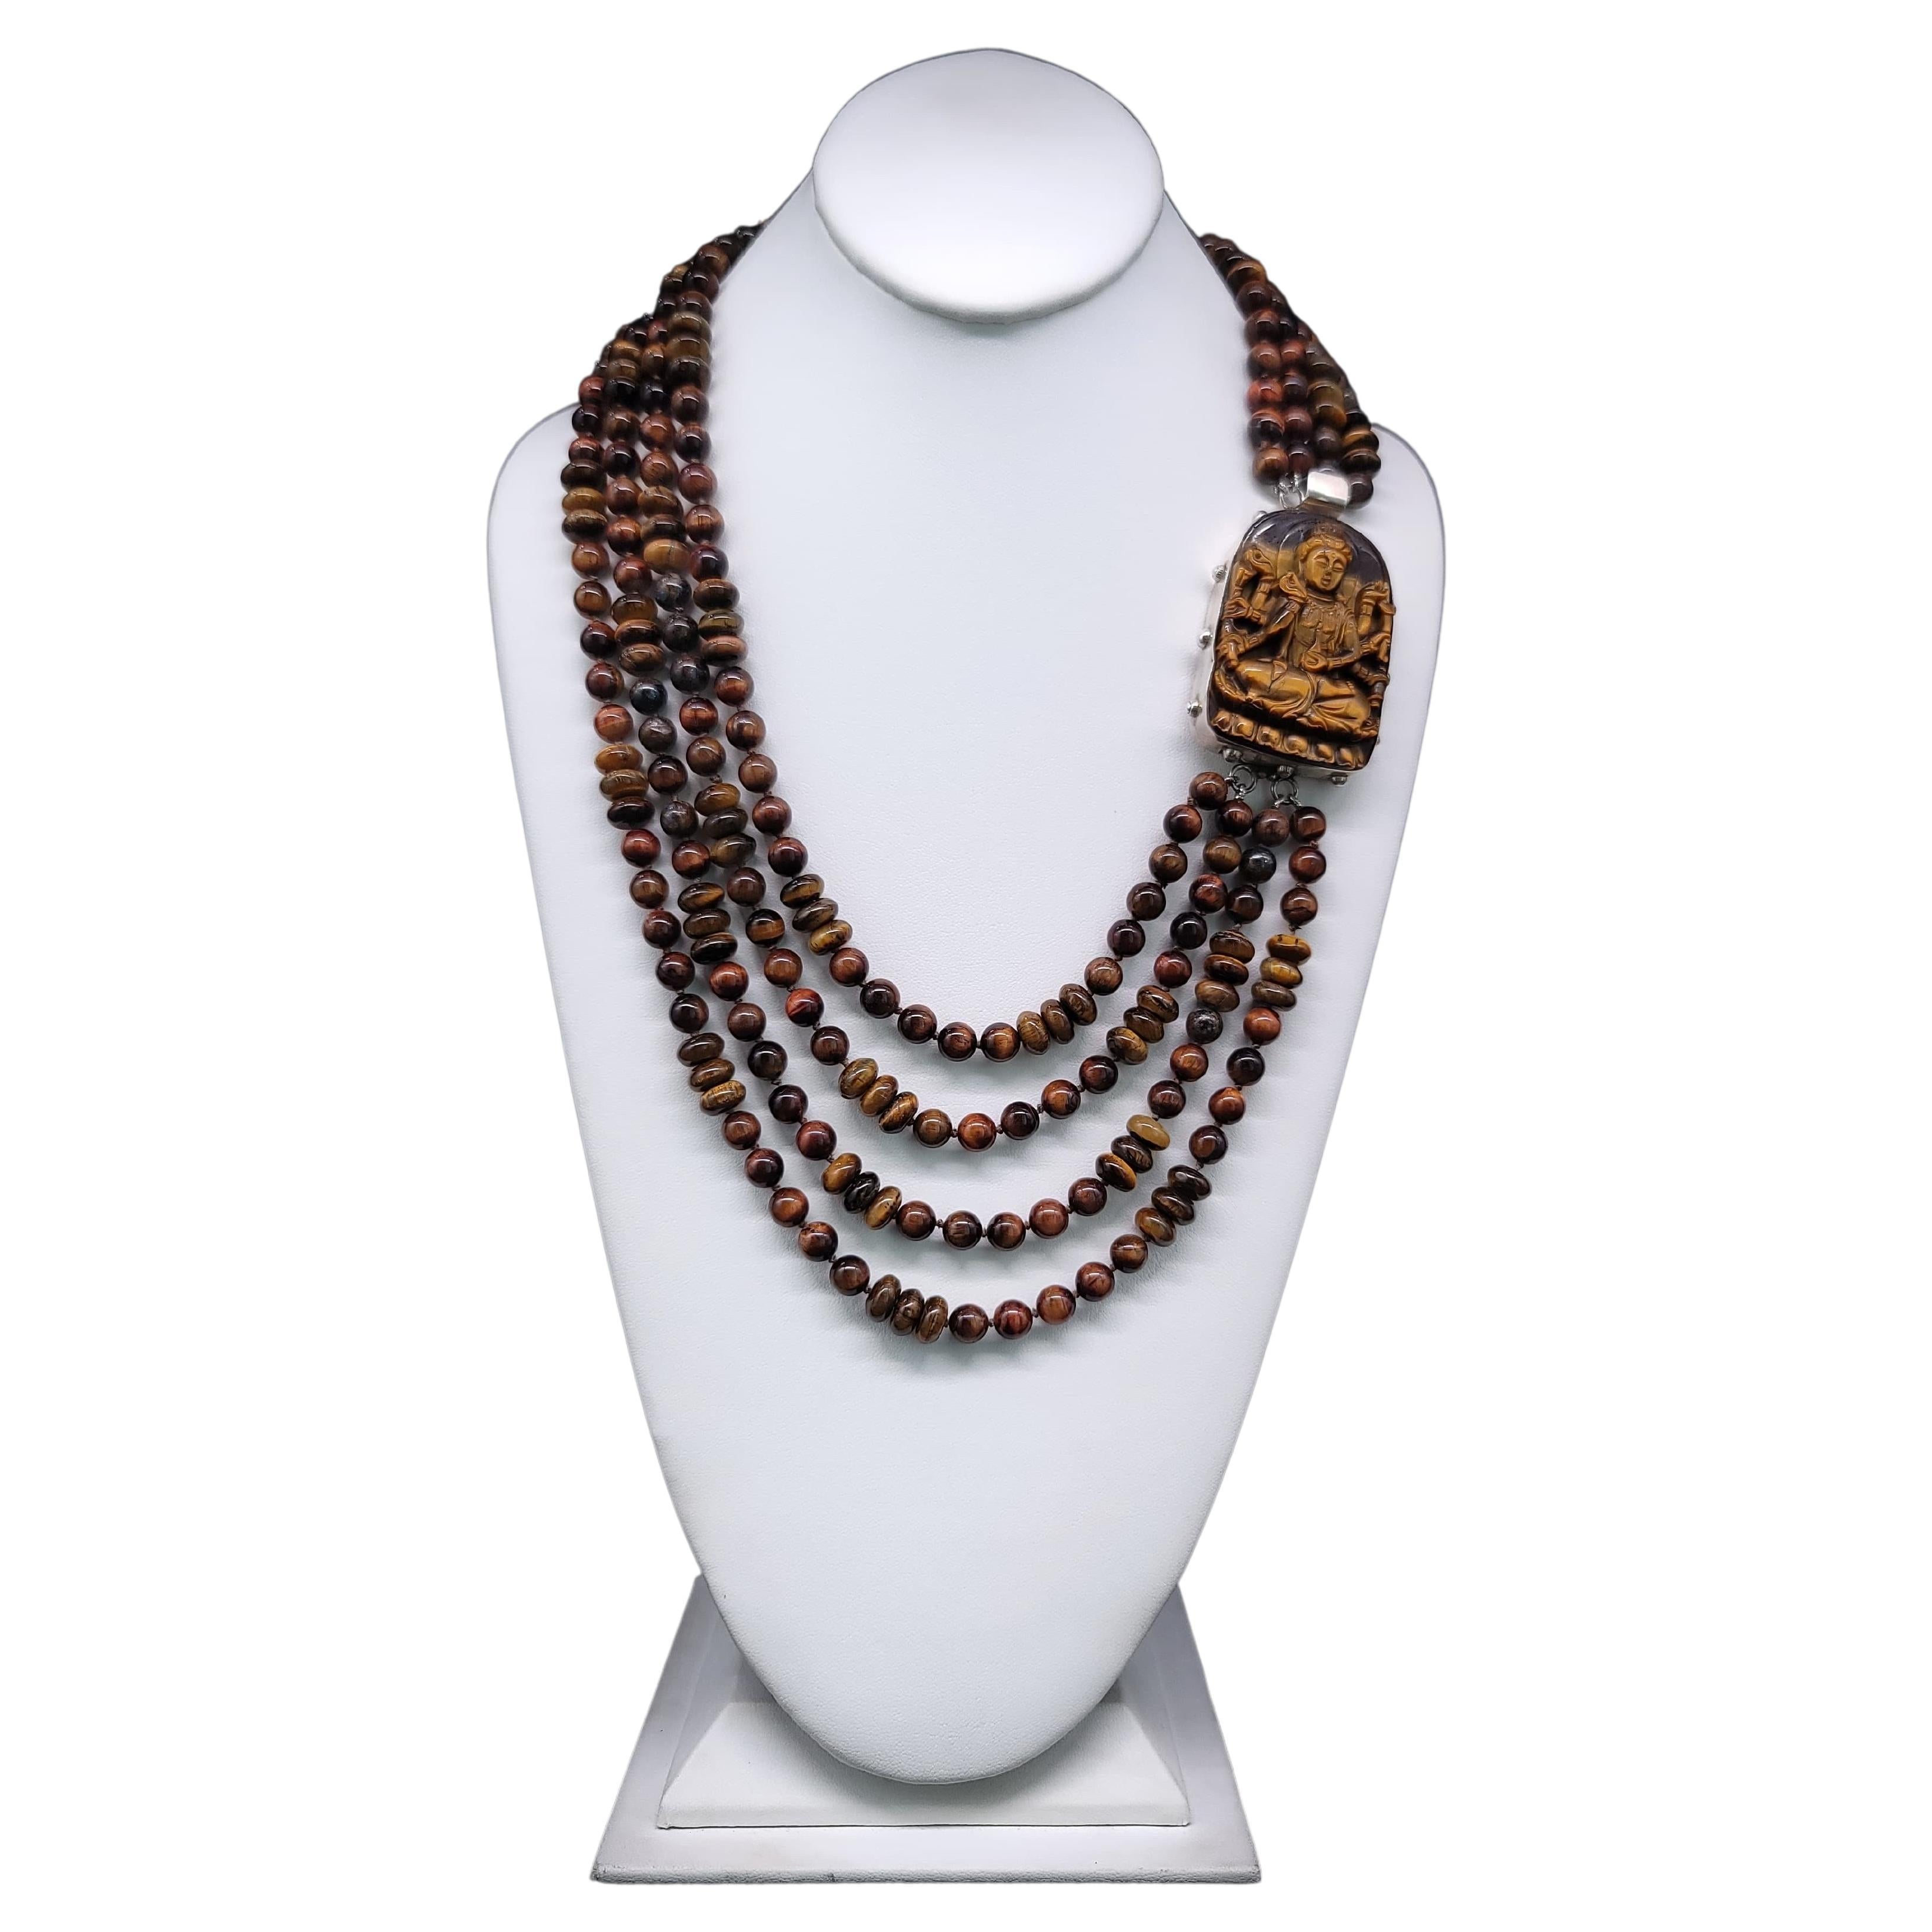 A.jeschel Sophisticated Tiger’s Eye Necklace with a Powerful Clasp. For Sale